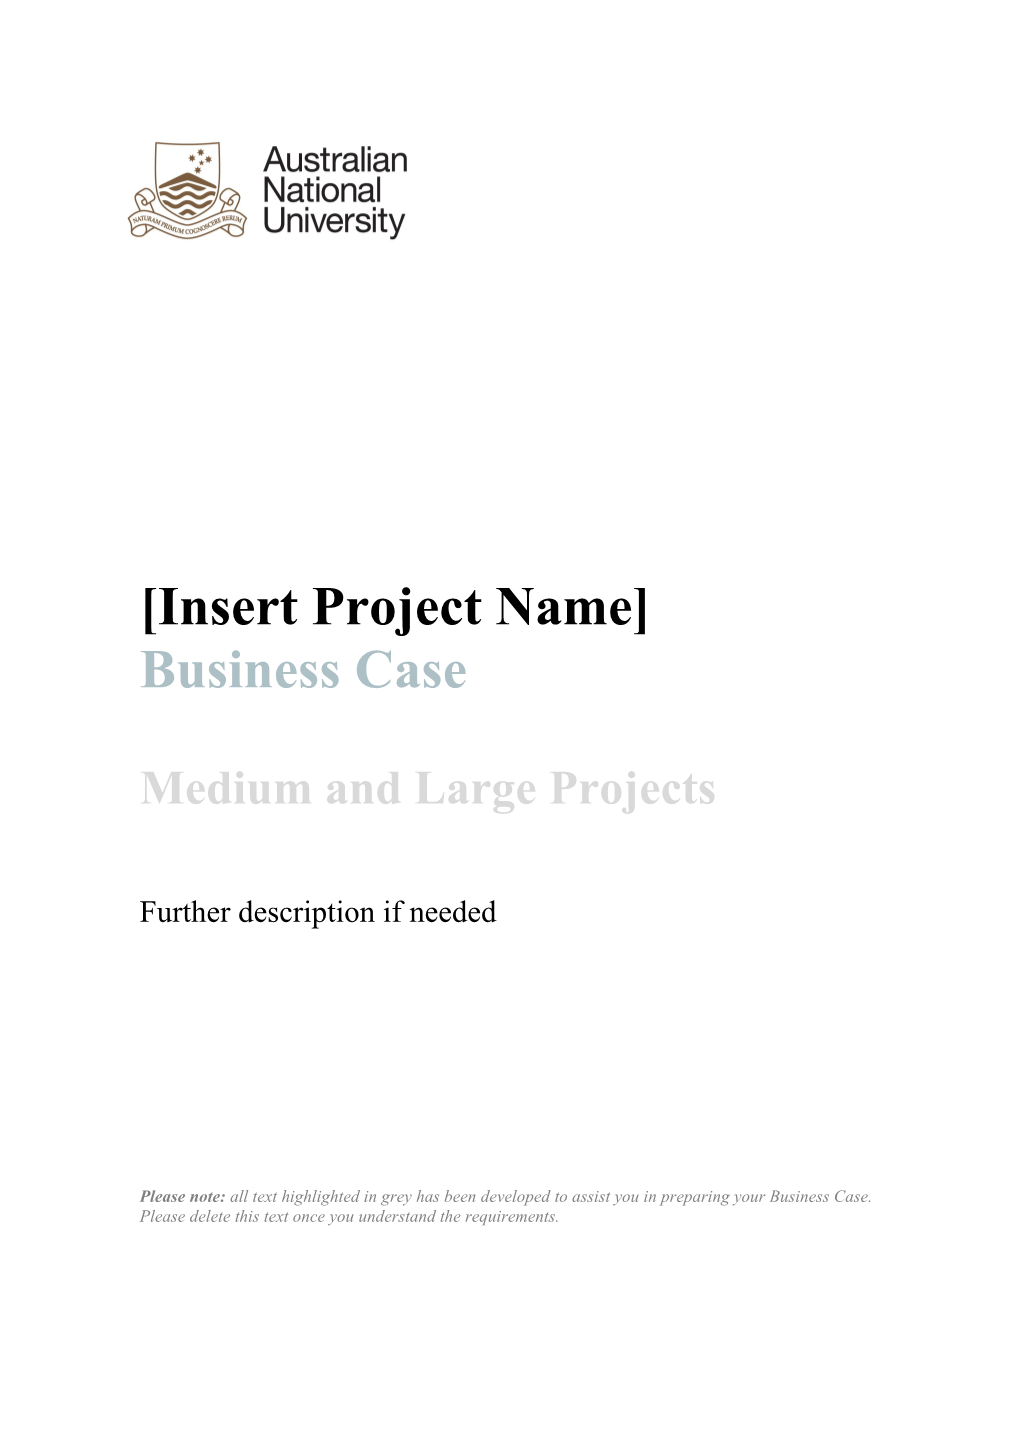 Business Case Template- Medium and Large Projects